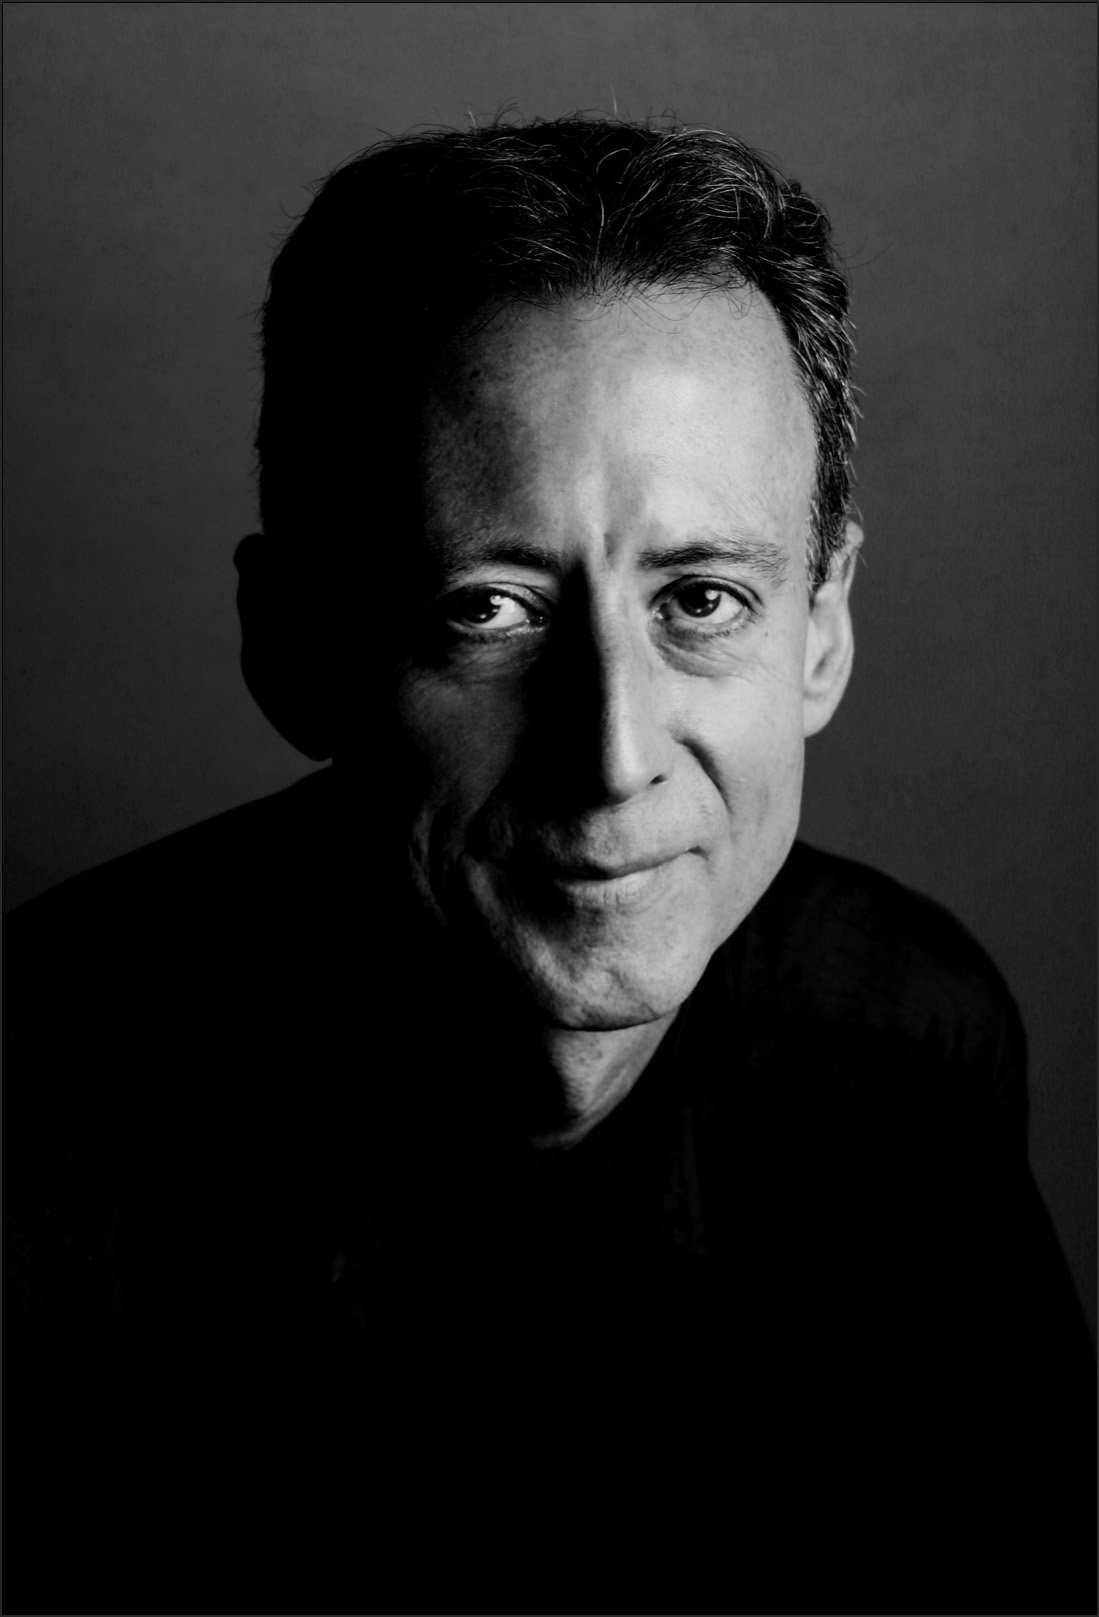 Peter Tatchell, human rights campaigner. Photographed for Bent magazine